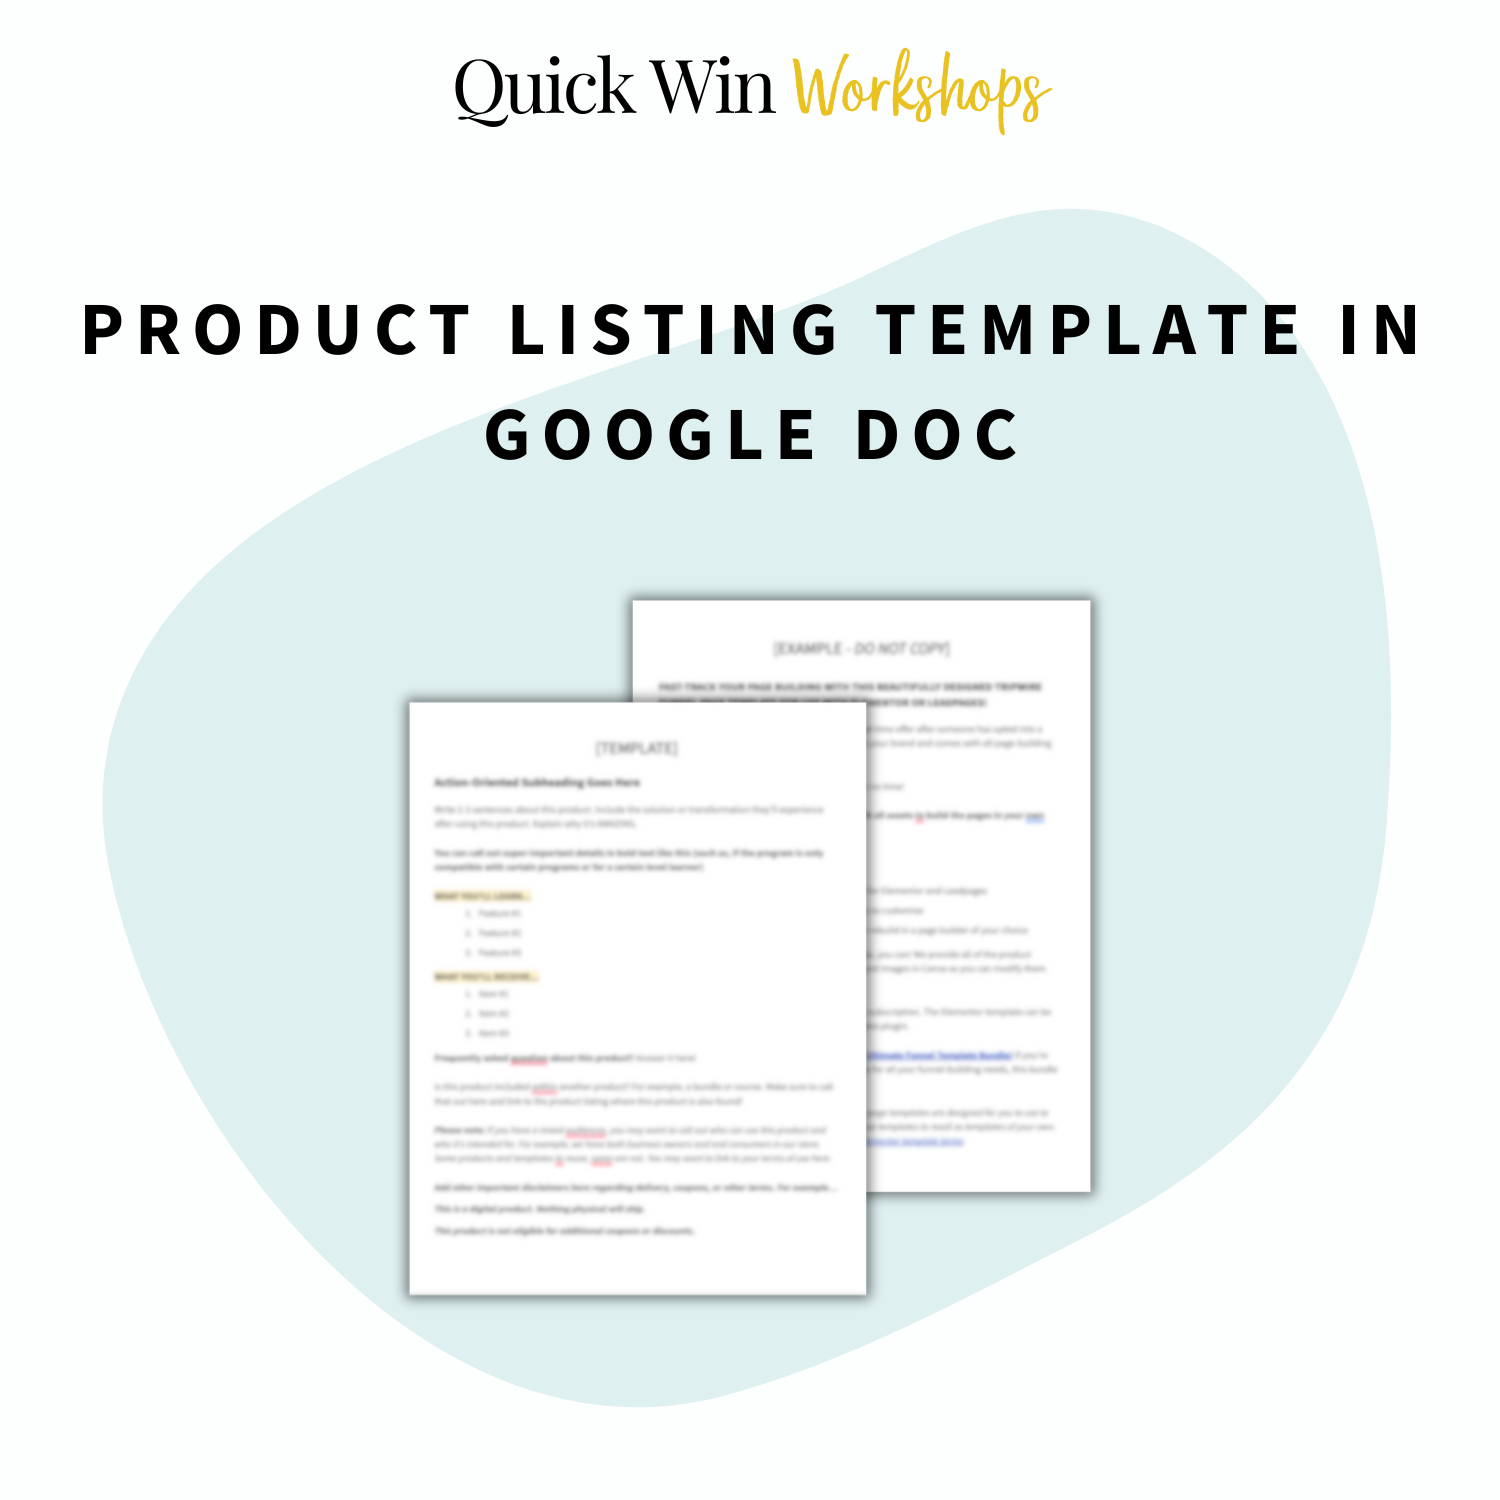 What's included in Quick Win Workshop: How to Strategically Sell Digital Products with Shopify - Product Listing Template in a Google Doc